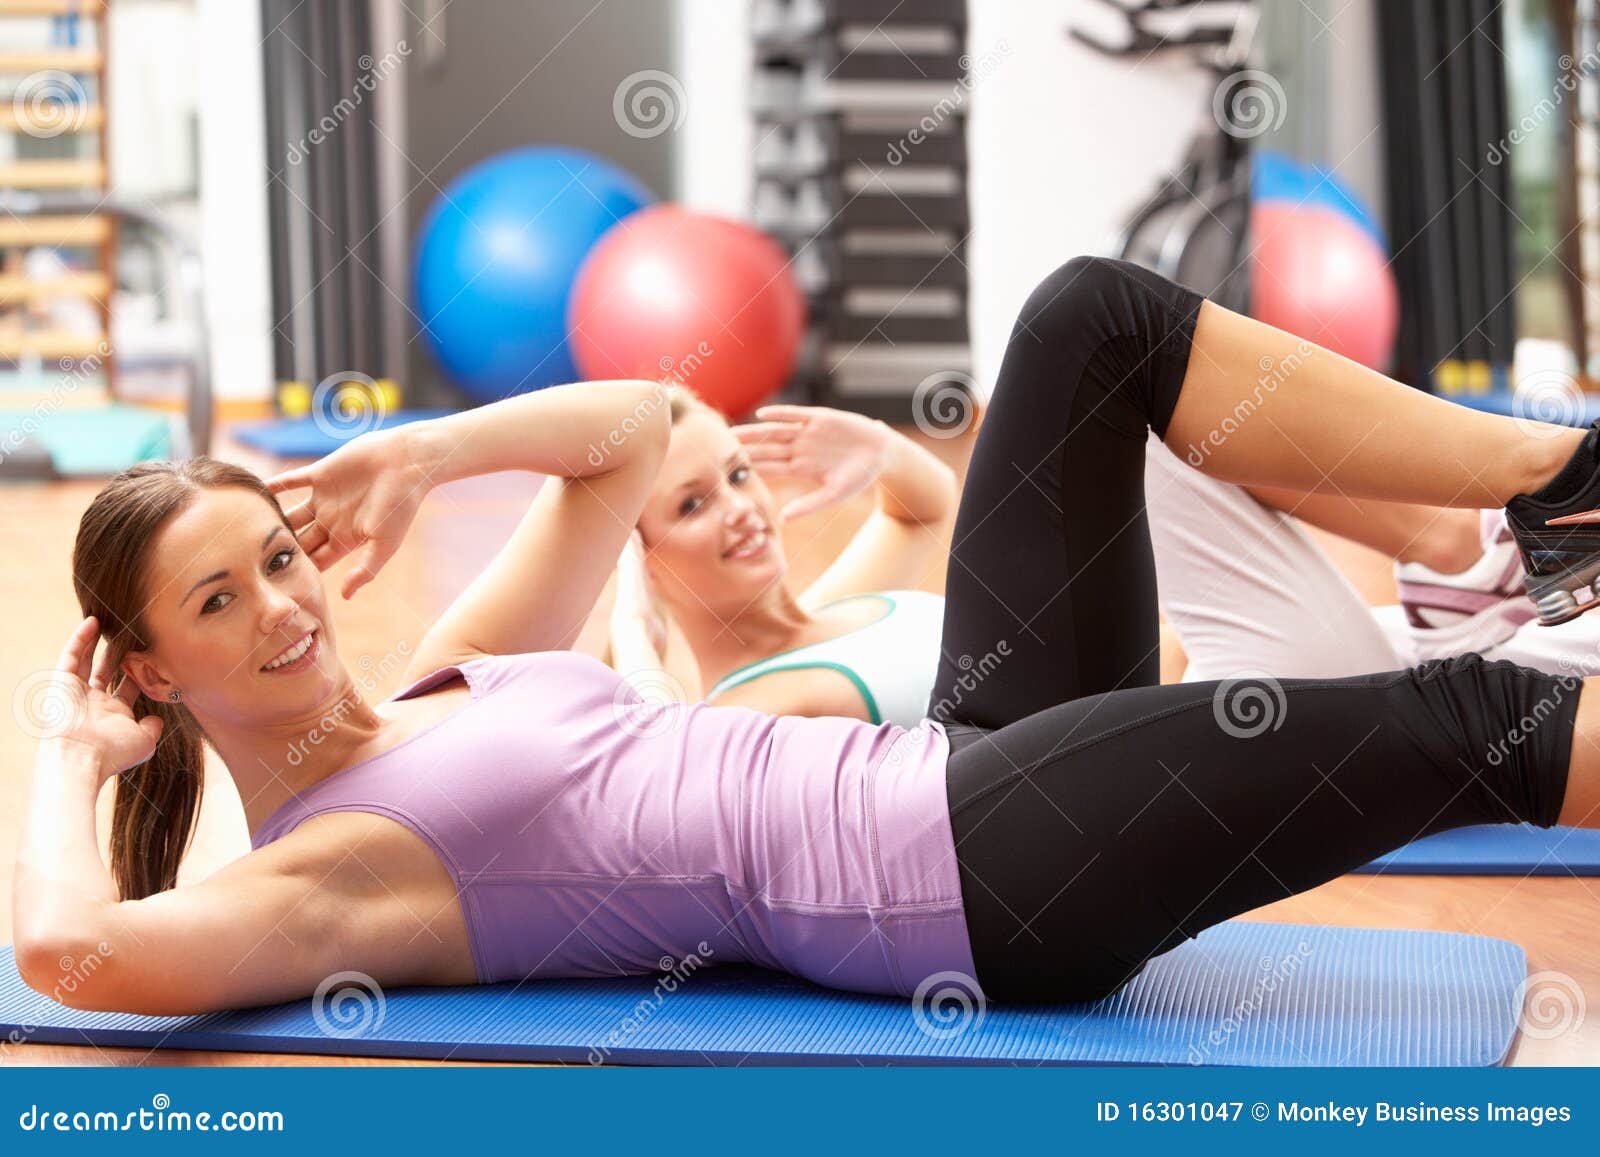 Woman Stretching at the Gym · Free Stock Photo